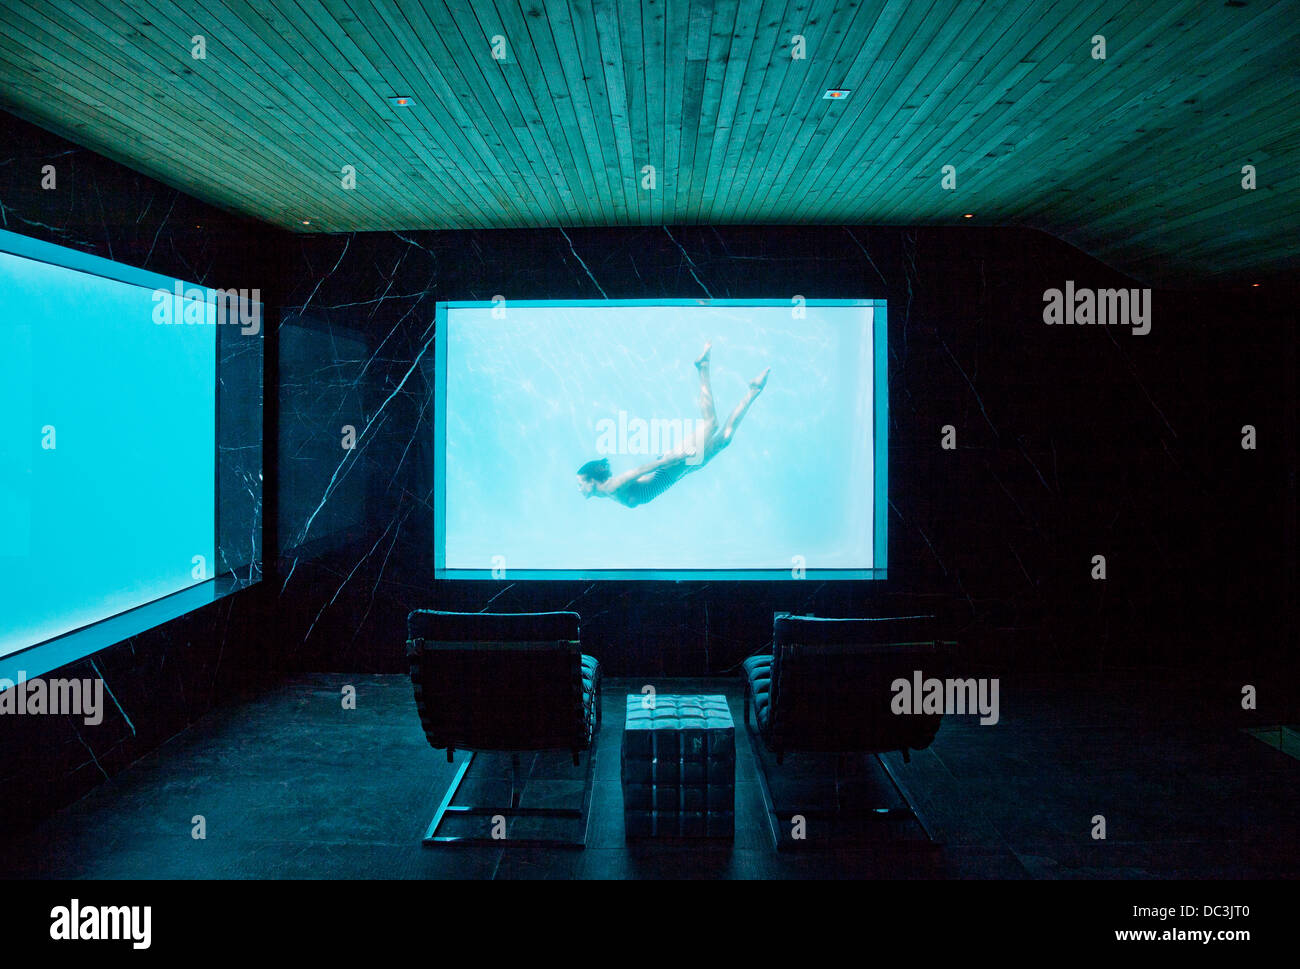 View of woman swimming underwater from window in pool room Stock Photo